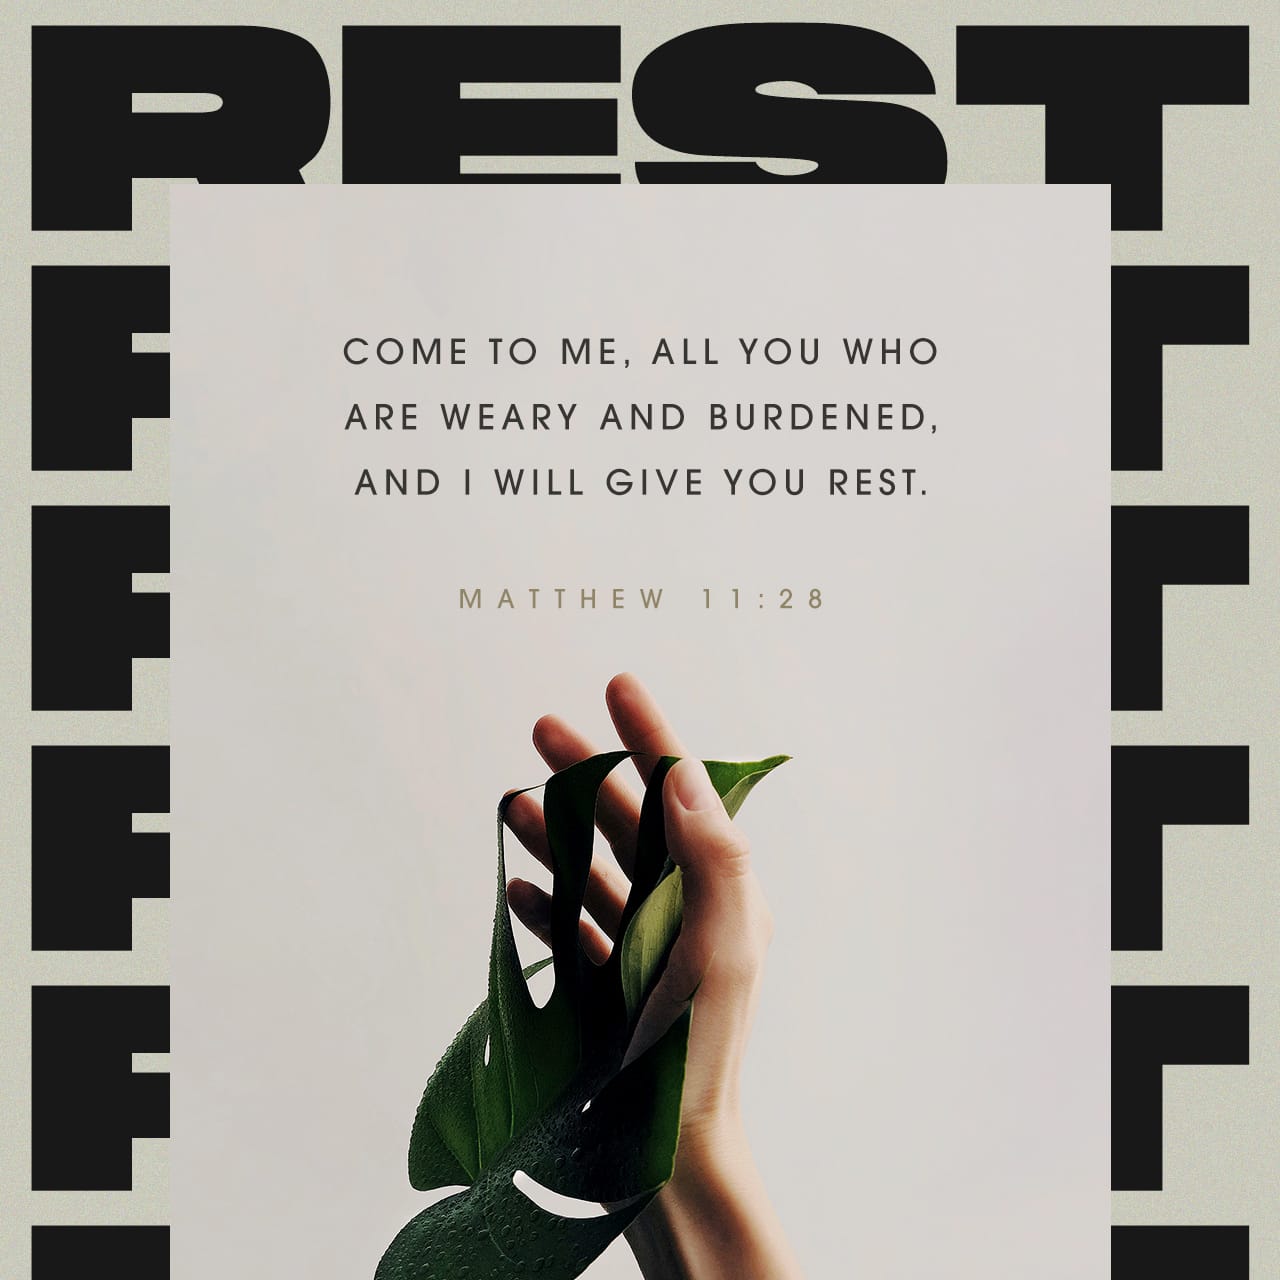 Matthew 11:28-30 “Come to me, all you who are weary and burdened, and I  will give you rest. Take my yoke upon you and learn from me, for I am  gentle and